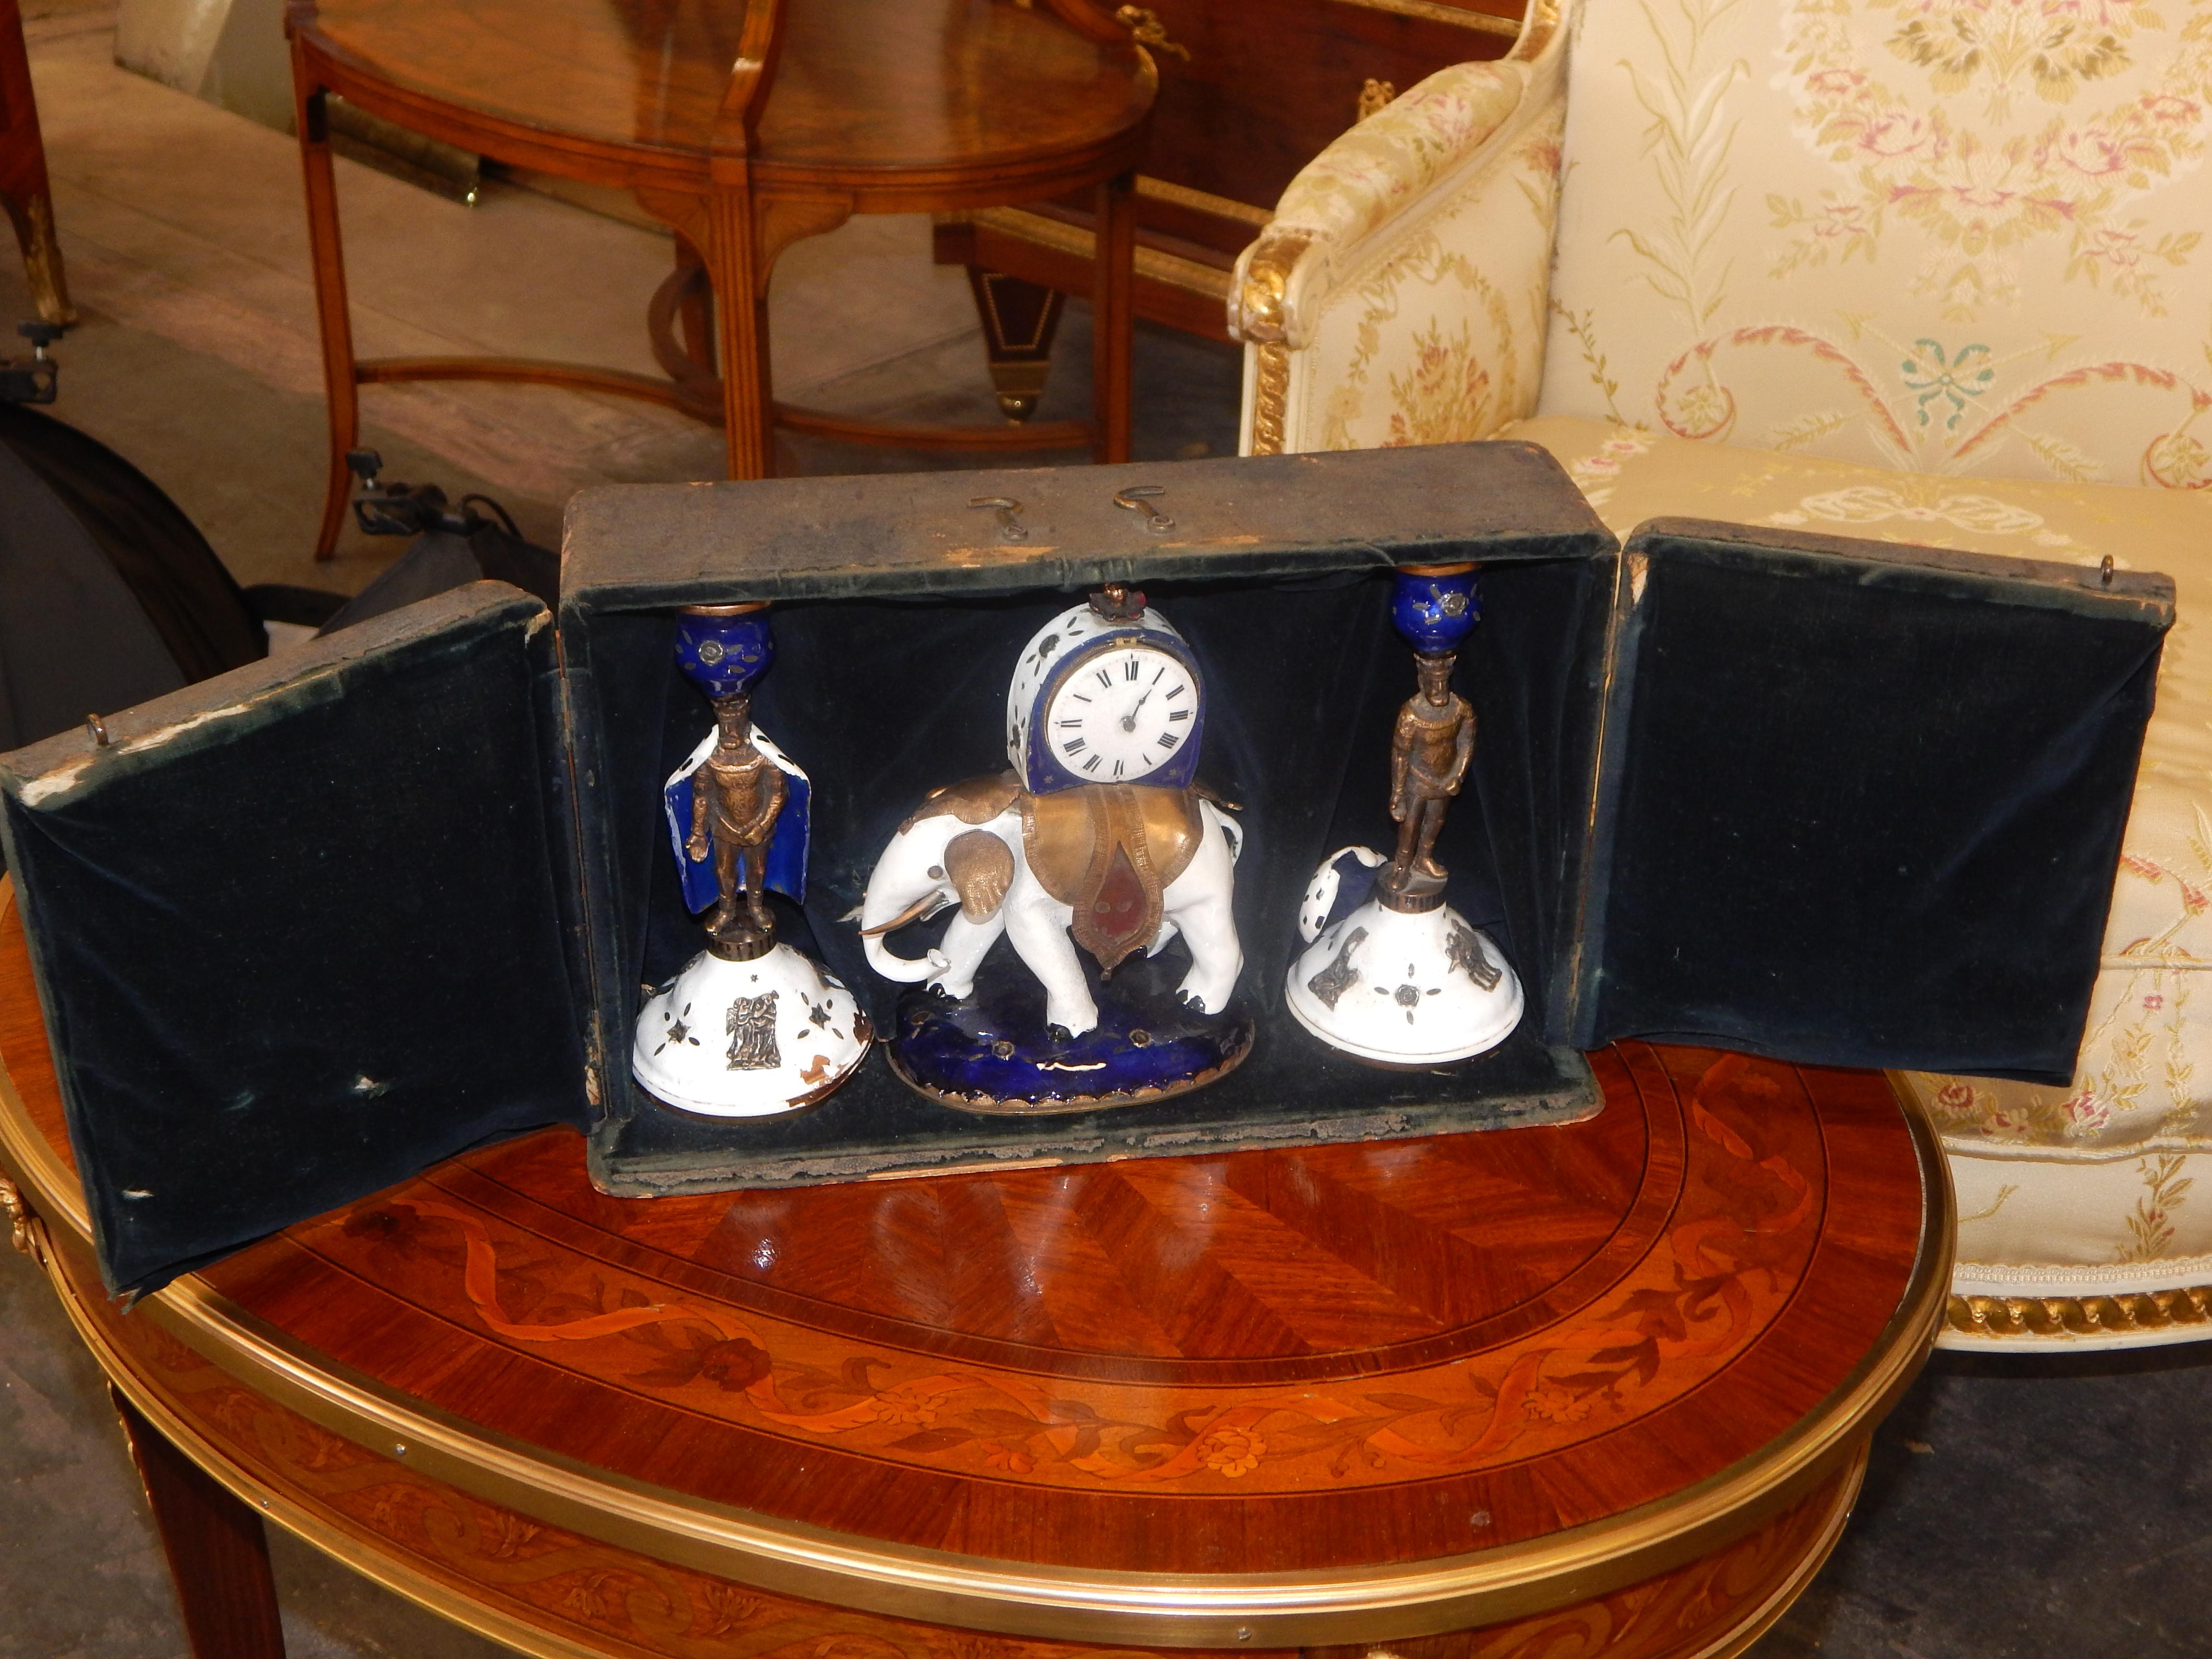 Extremely Rare Enameled Three-Piece Clock Set by 